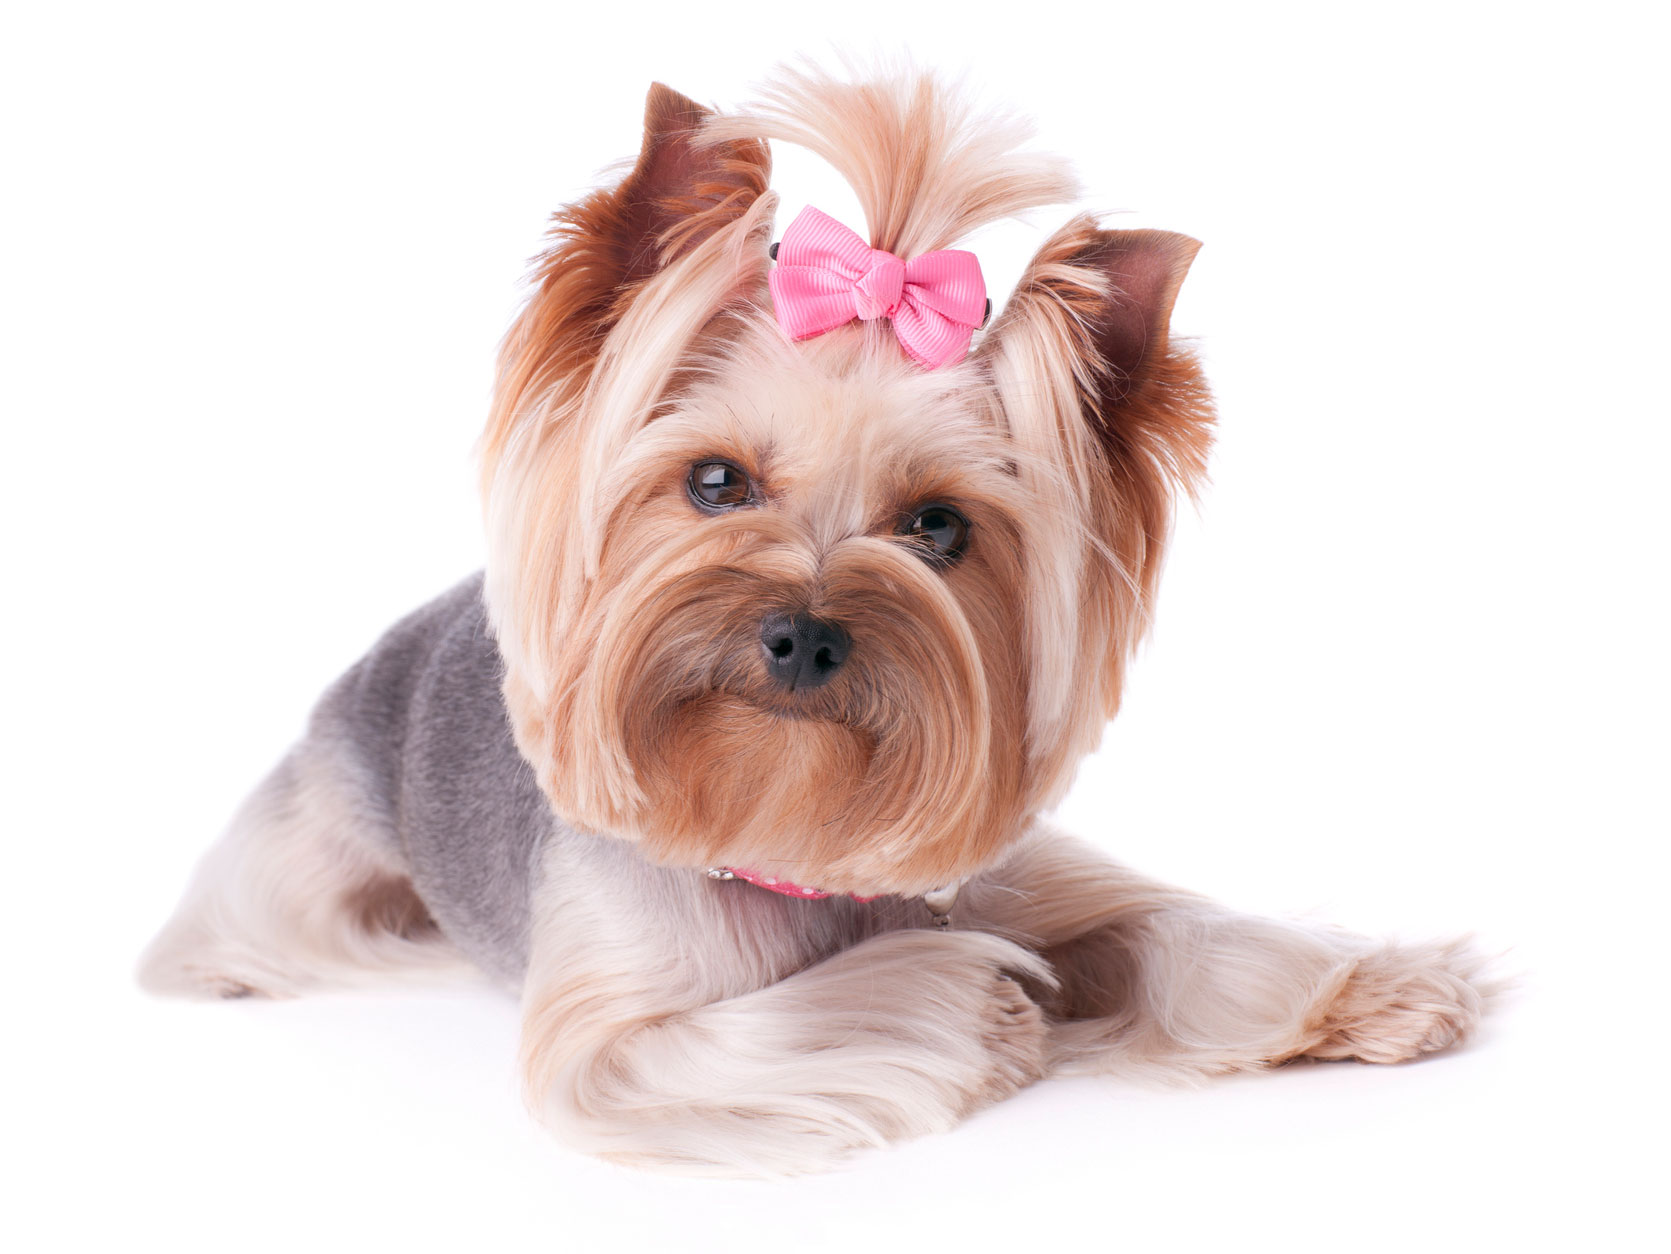 Pet Grooming in Wethersfield: Dog Wearing Bow